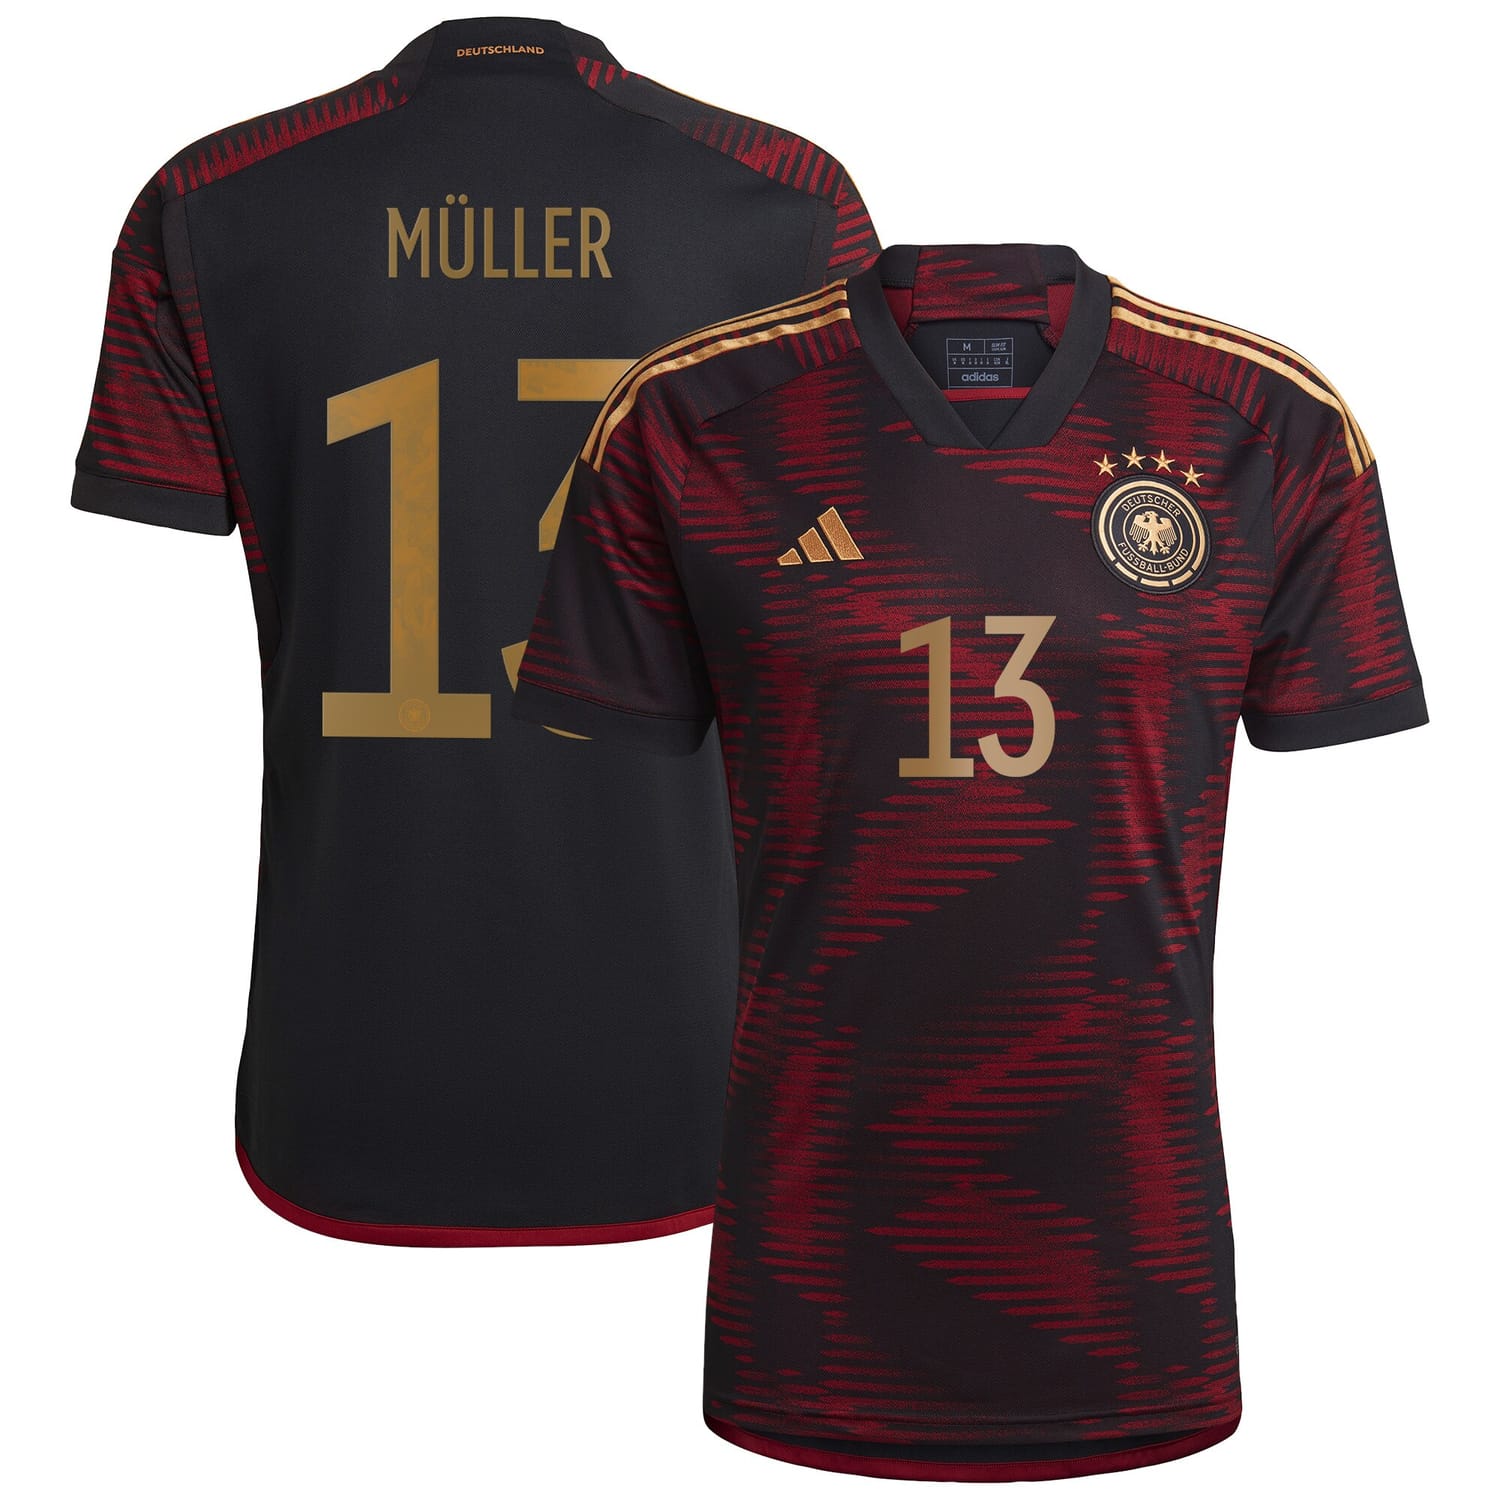 Germany National Team Away Jersey Shirt player Thomas Müller 13 printing for Men